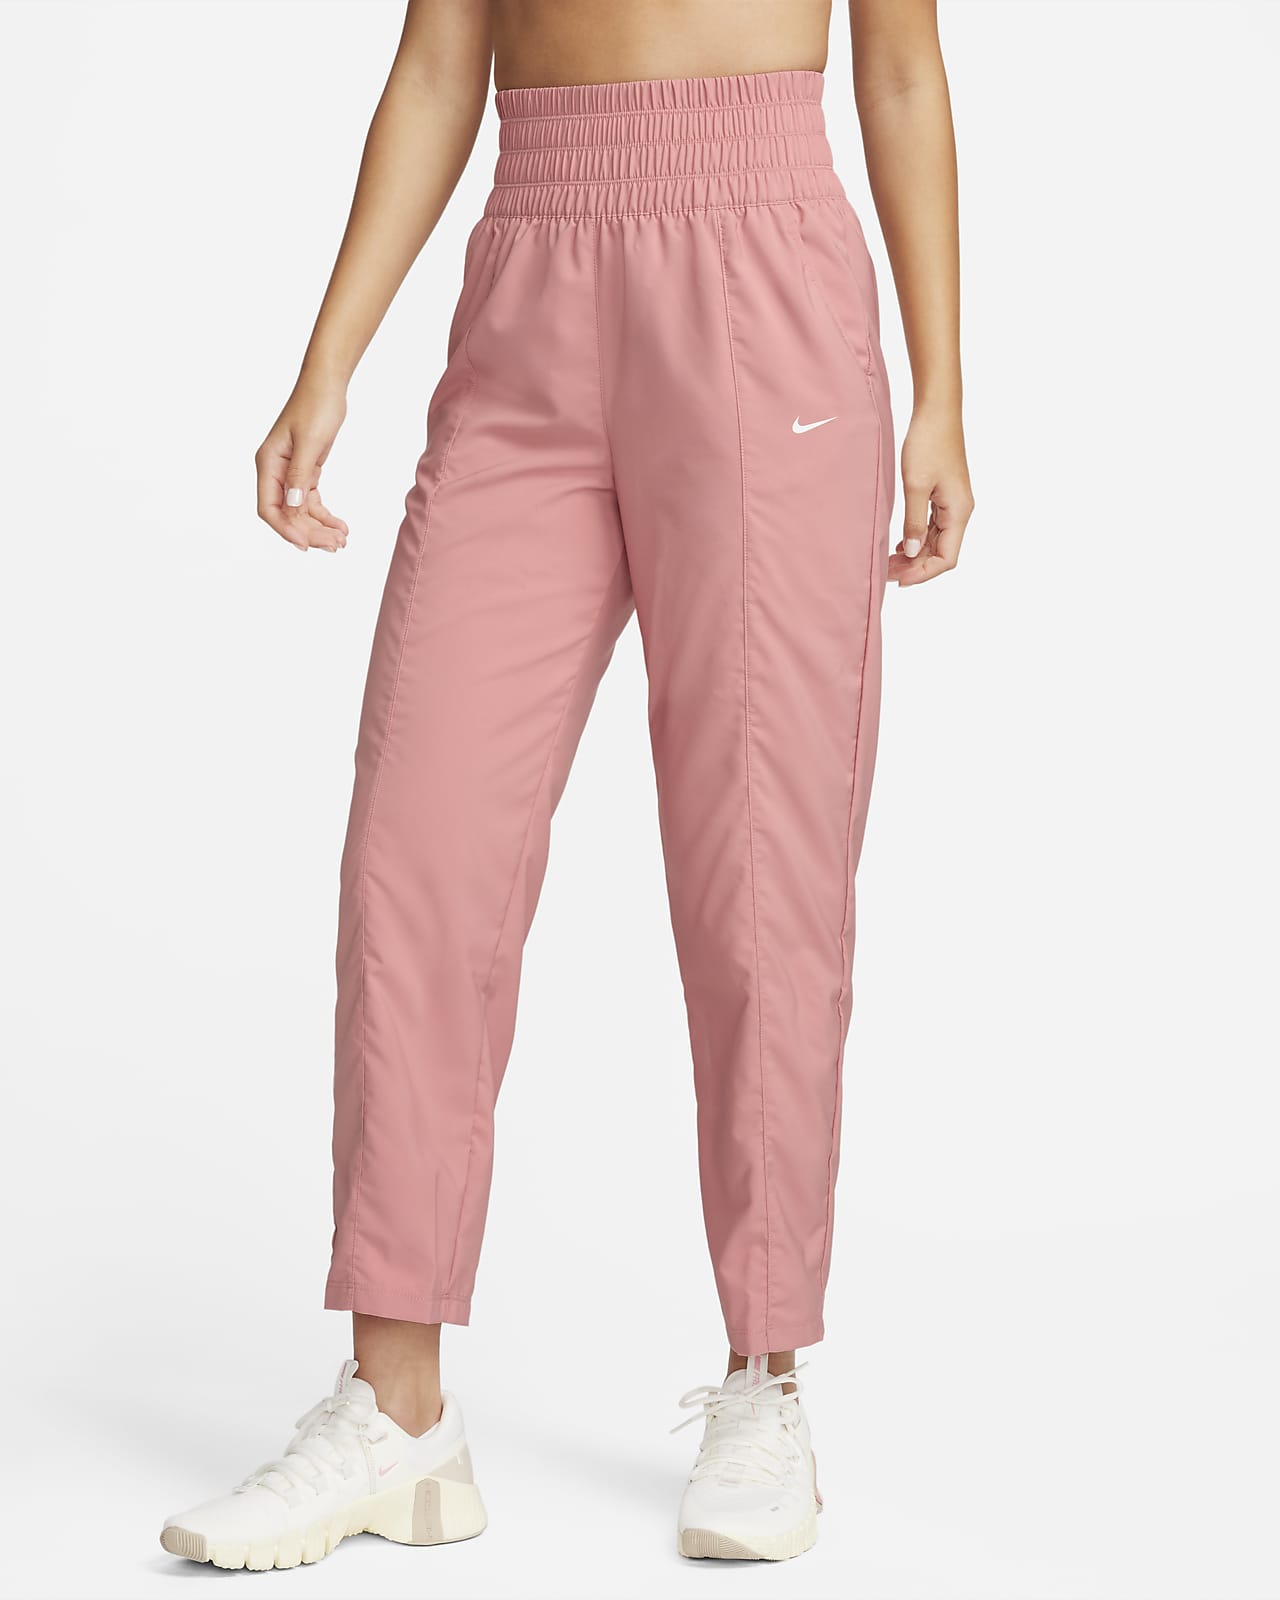 Missguided  High Waisted Cigarette Trousers  Pink  Missguided